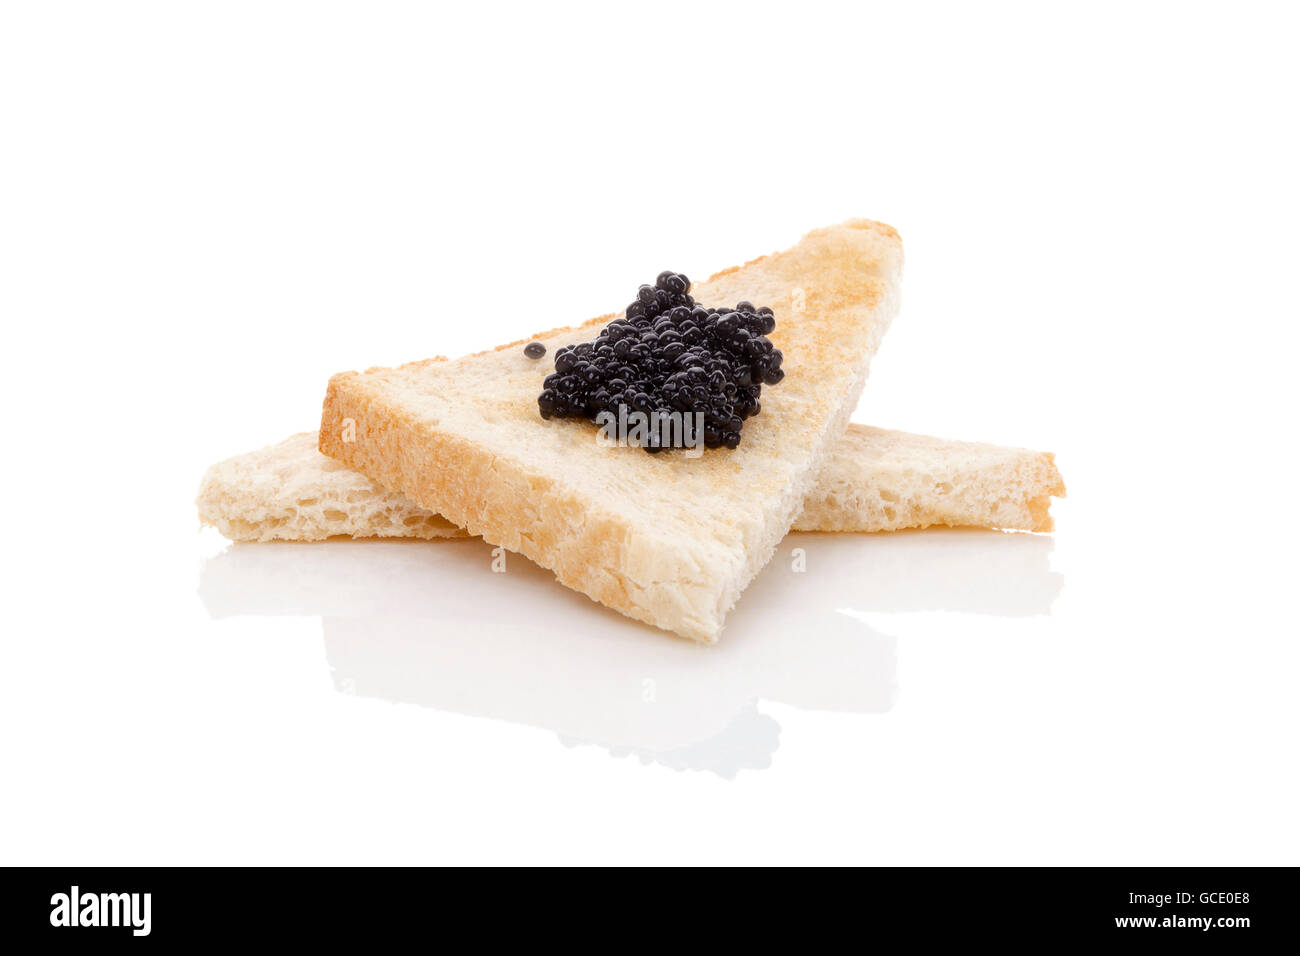 Delicious black caviar on toast isolated on white background. Exquisite luxurious gourmet eating. Stock Photo